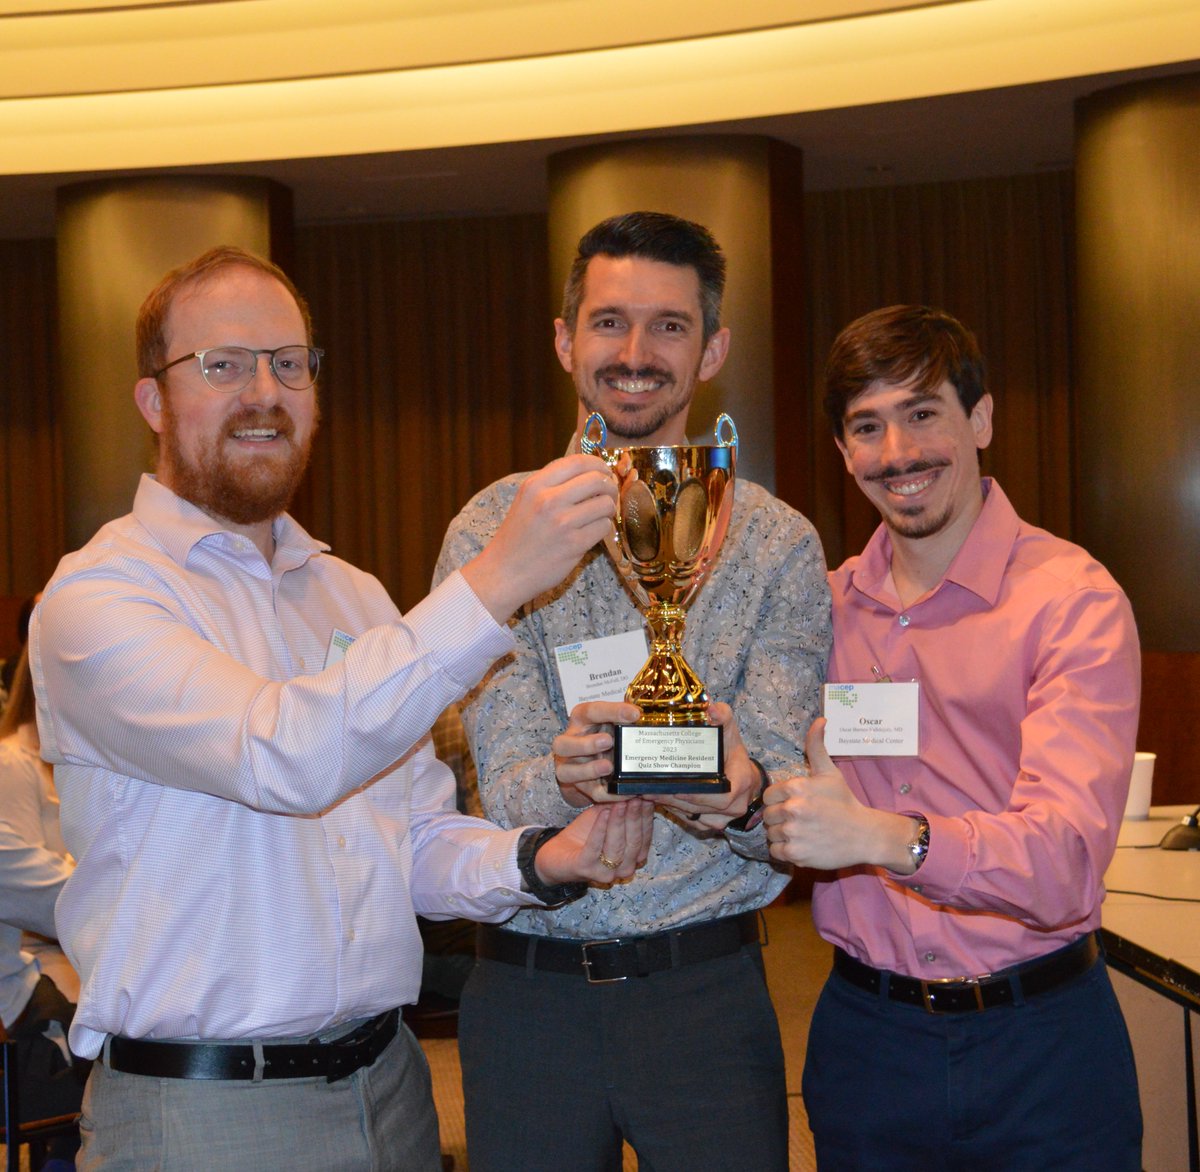 Congratulations to Baystate Emergency Medicine Residency - MACEP's 2023 Resident Quiz Show Champions. Thank you to all who participated yesterday at our Annual Meeting. @BaystateEM